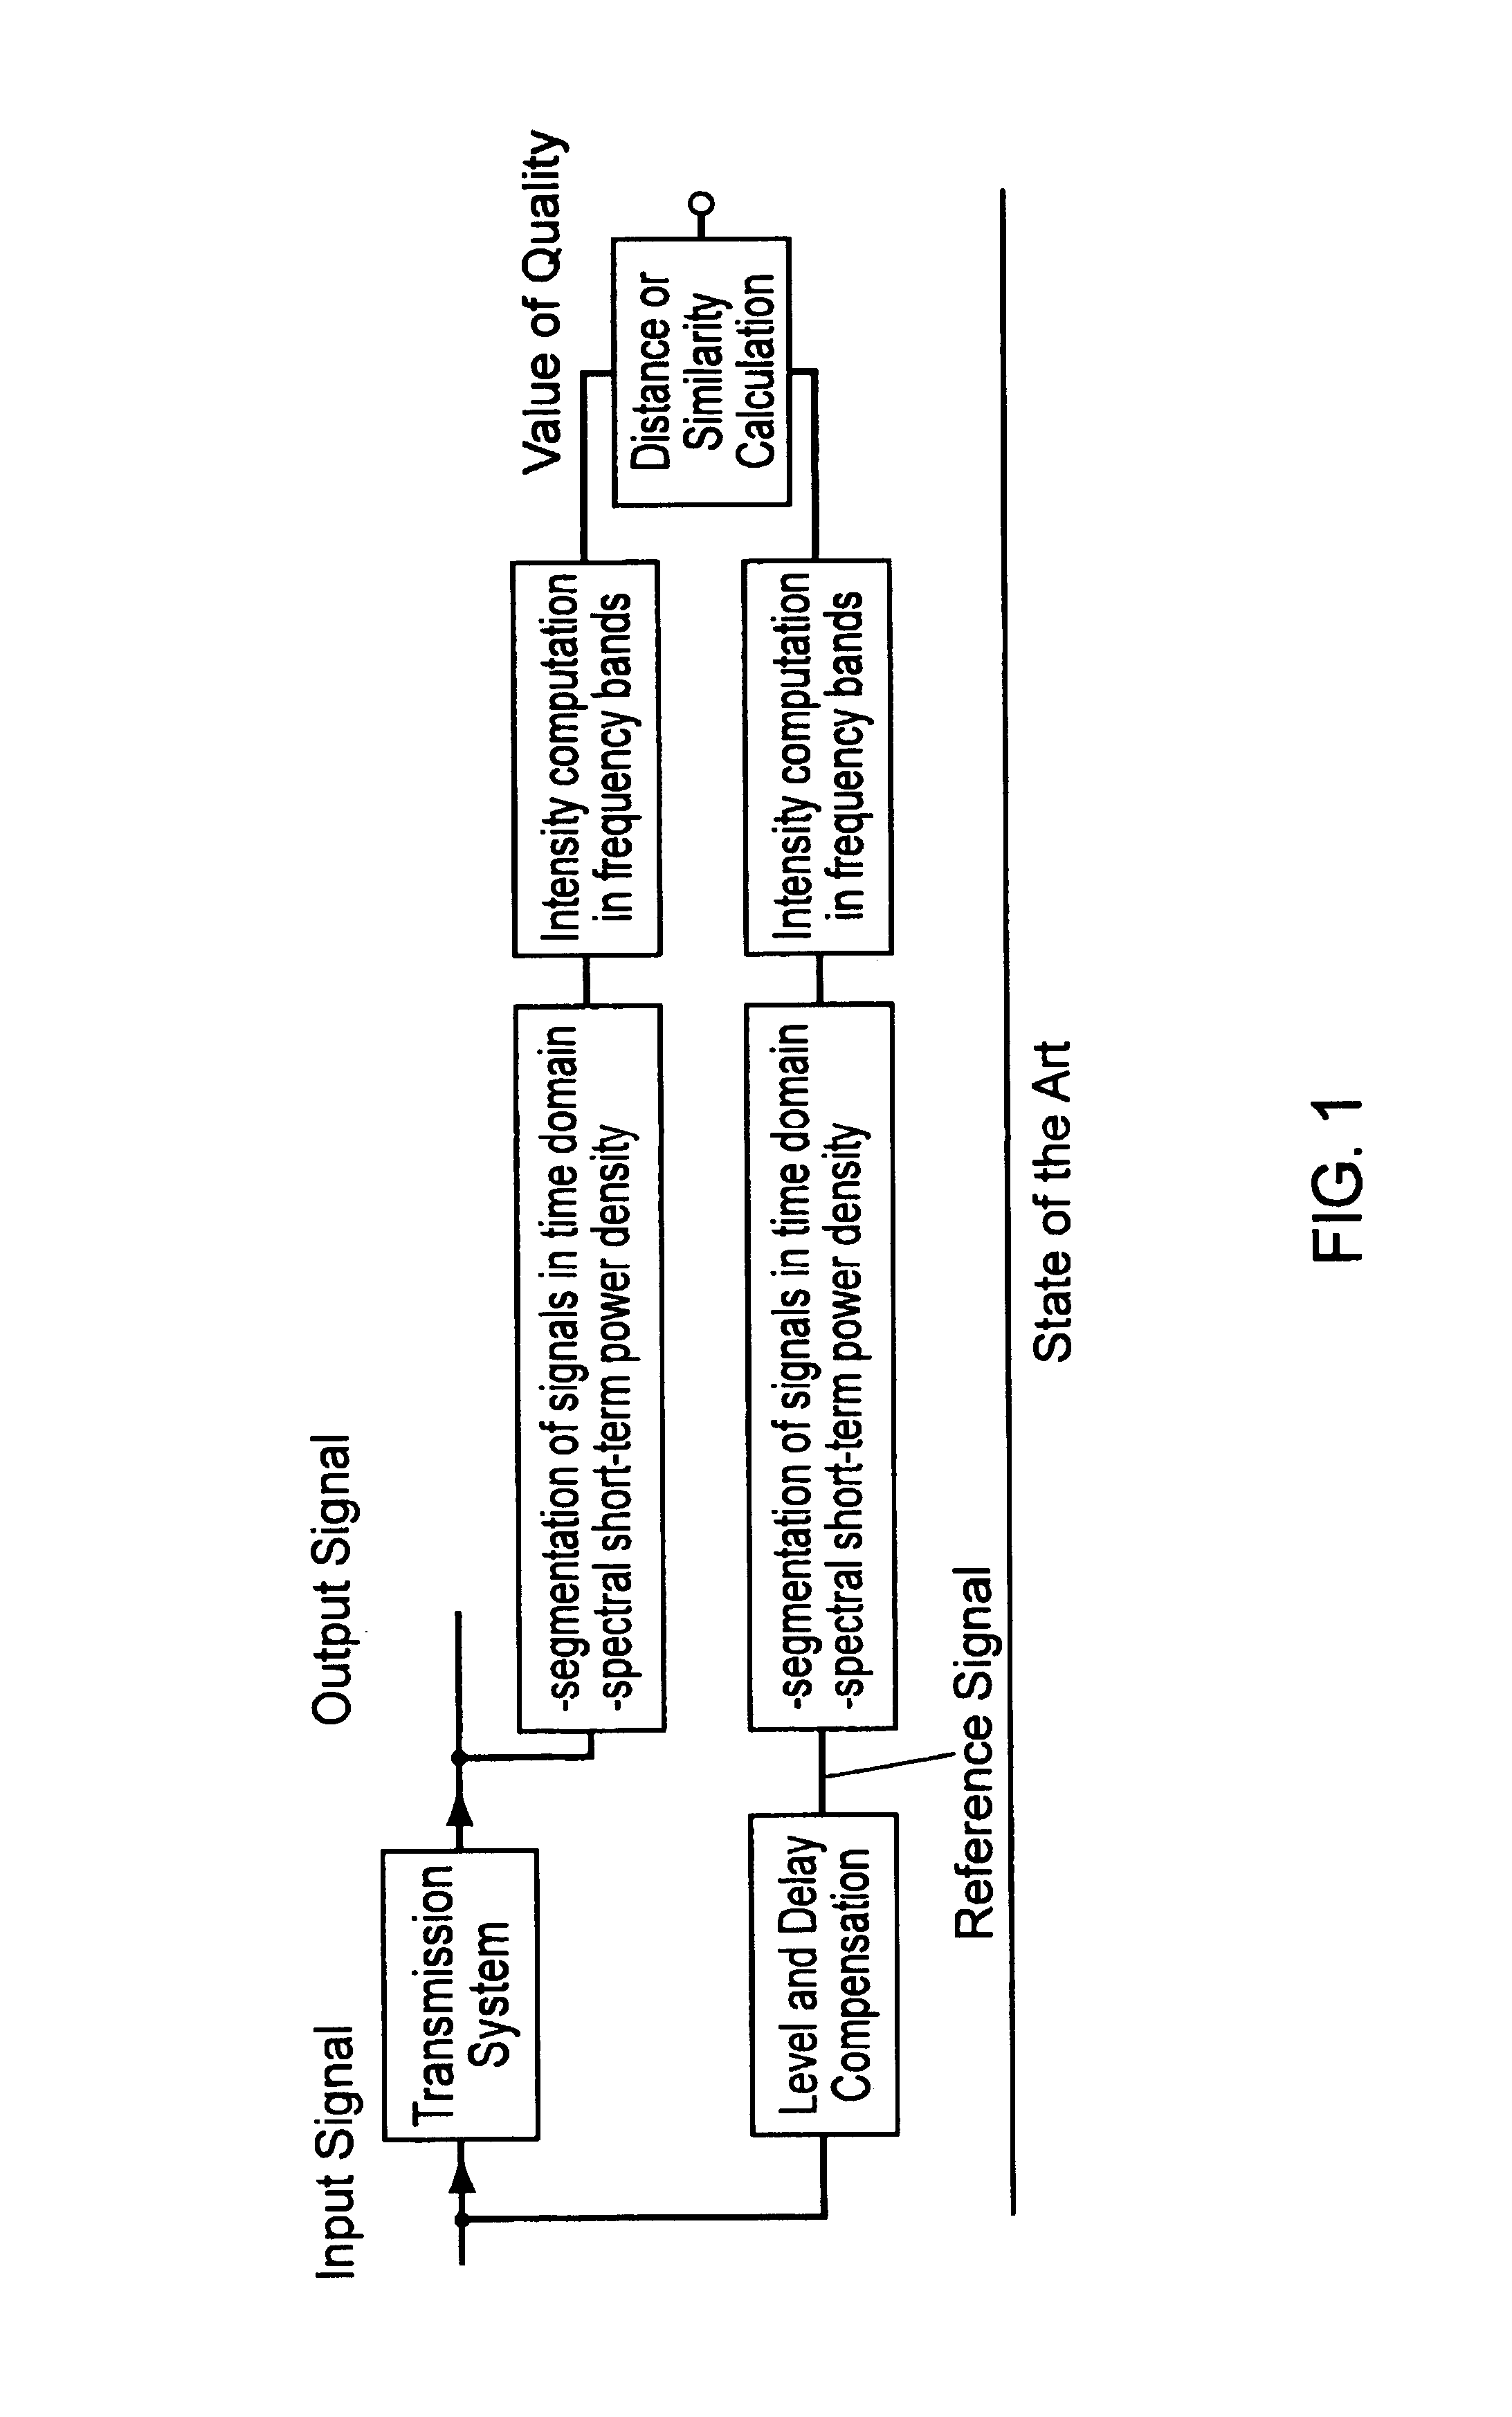 Method for determining speech quality by comparison of signal properties